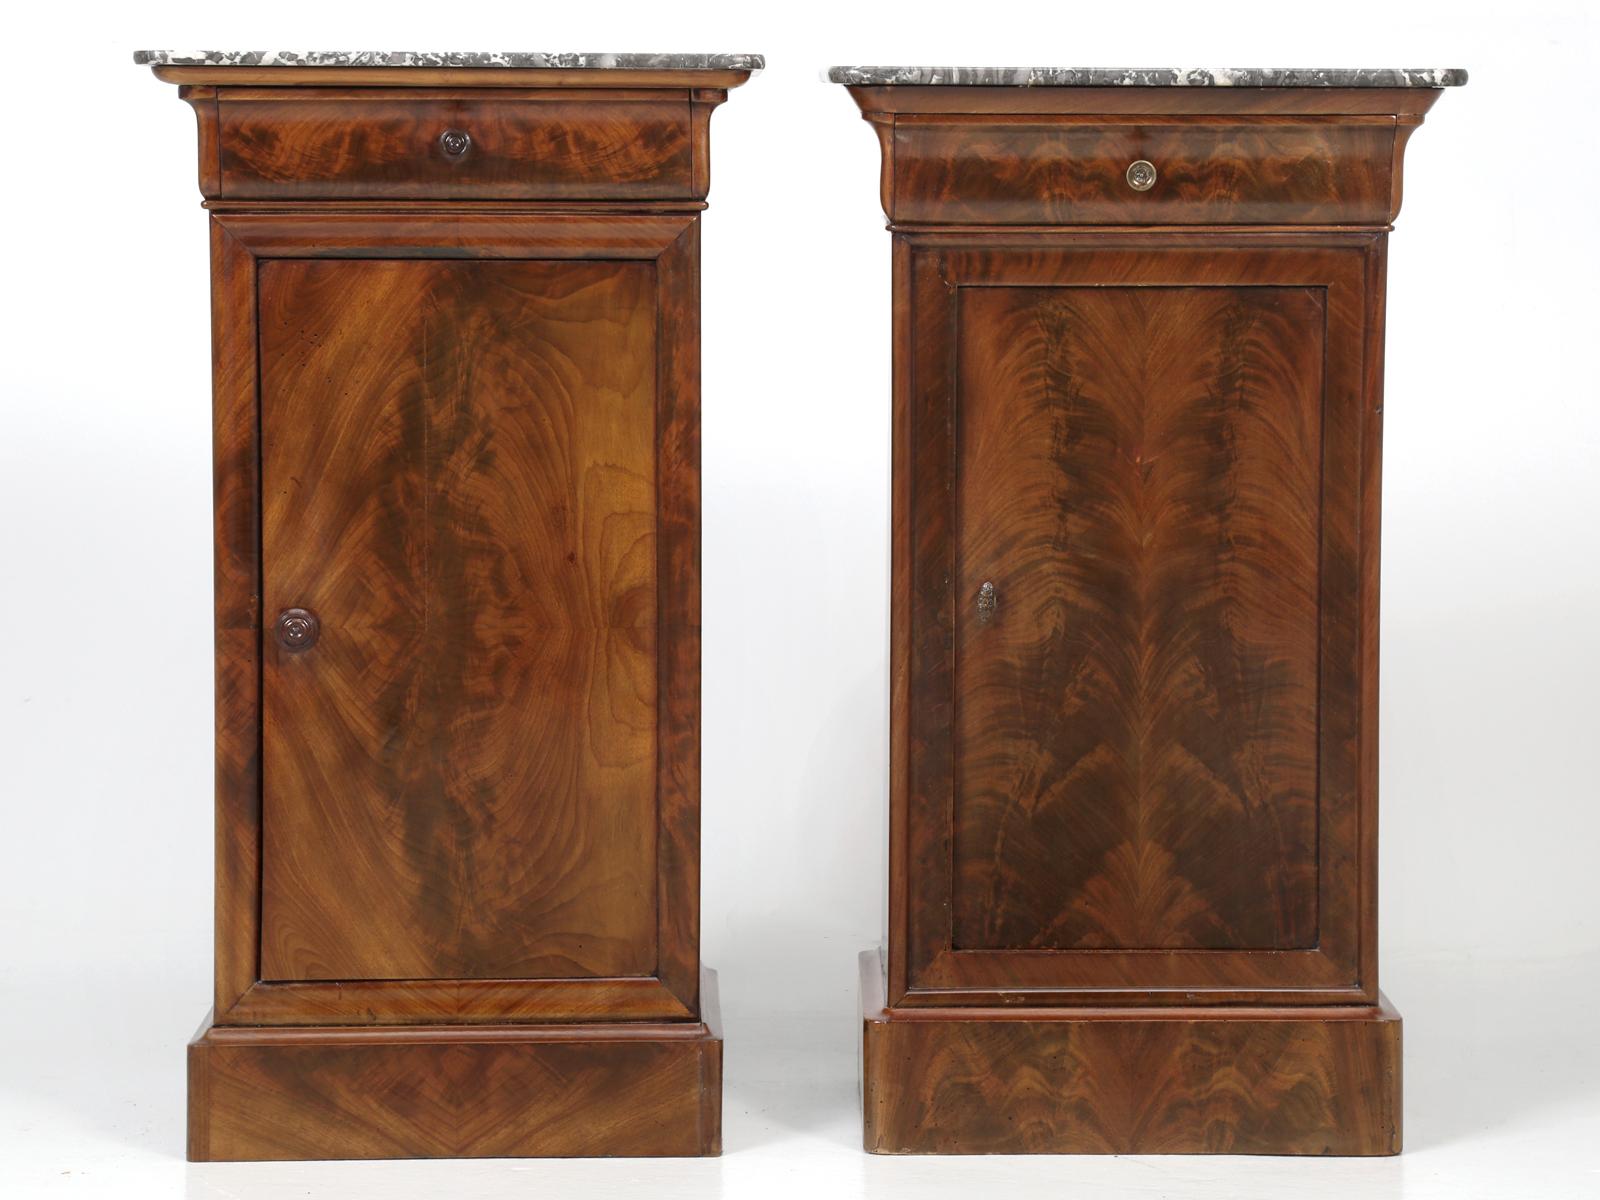 Antique French mahogany Louis Philippe style nightstands or in this case, end tables, since they are finished on all four sides. Our old plank restorer’s, applied an old fashion French polish, that simply makes the grain of the mahogany nightstands